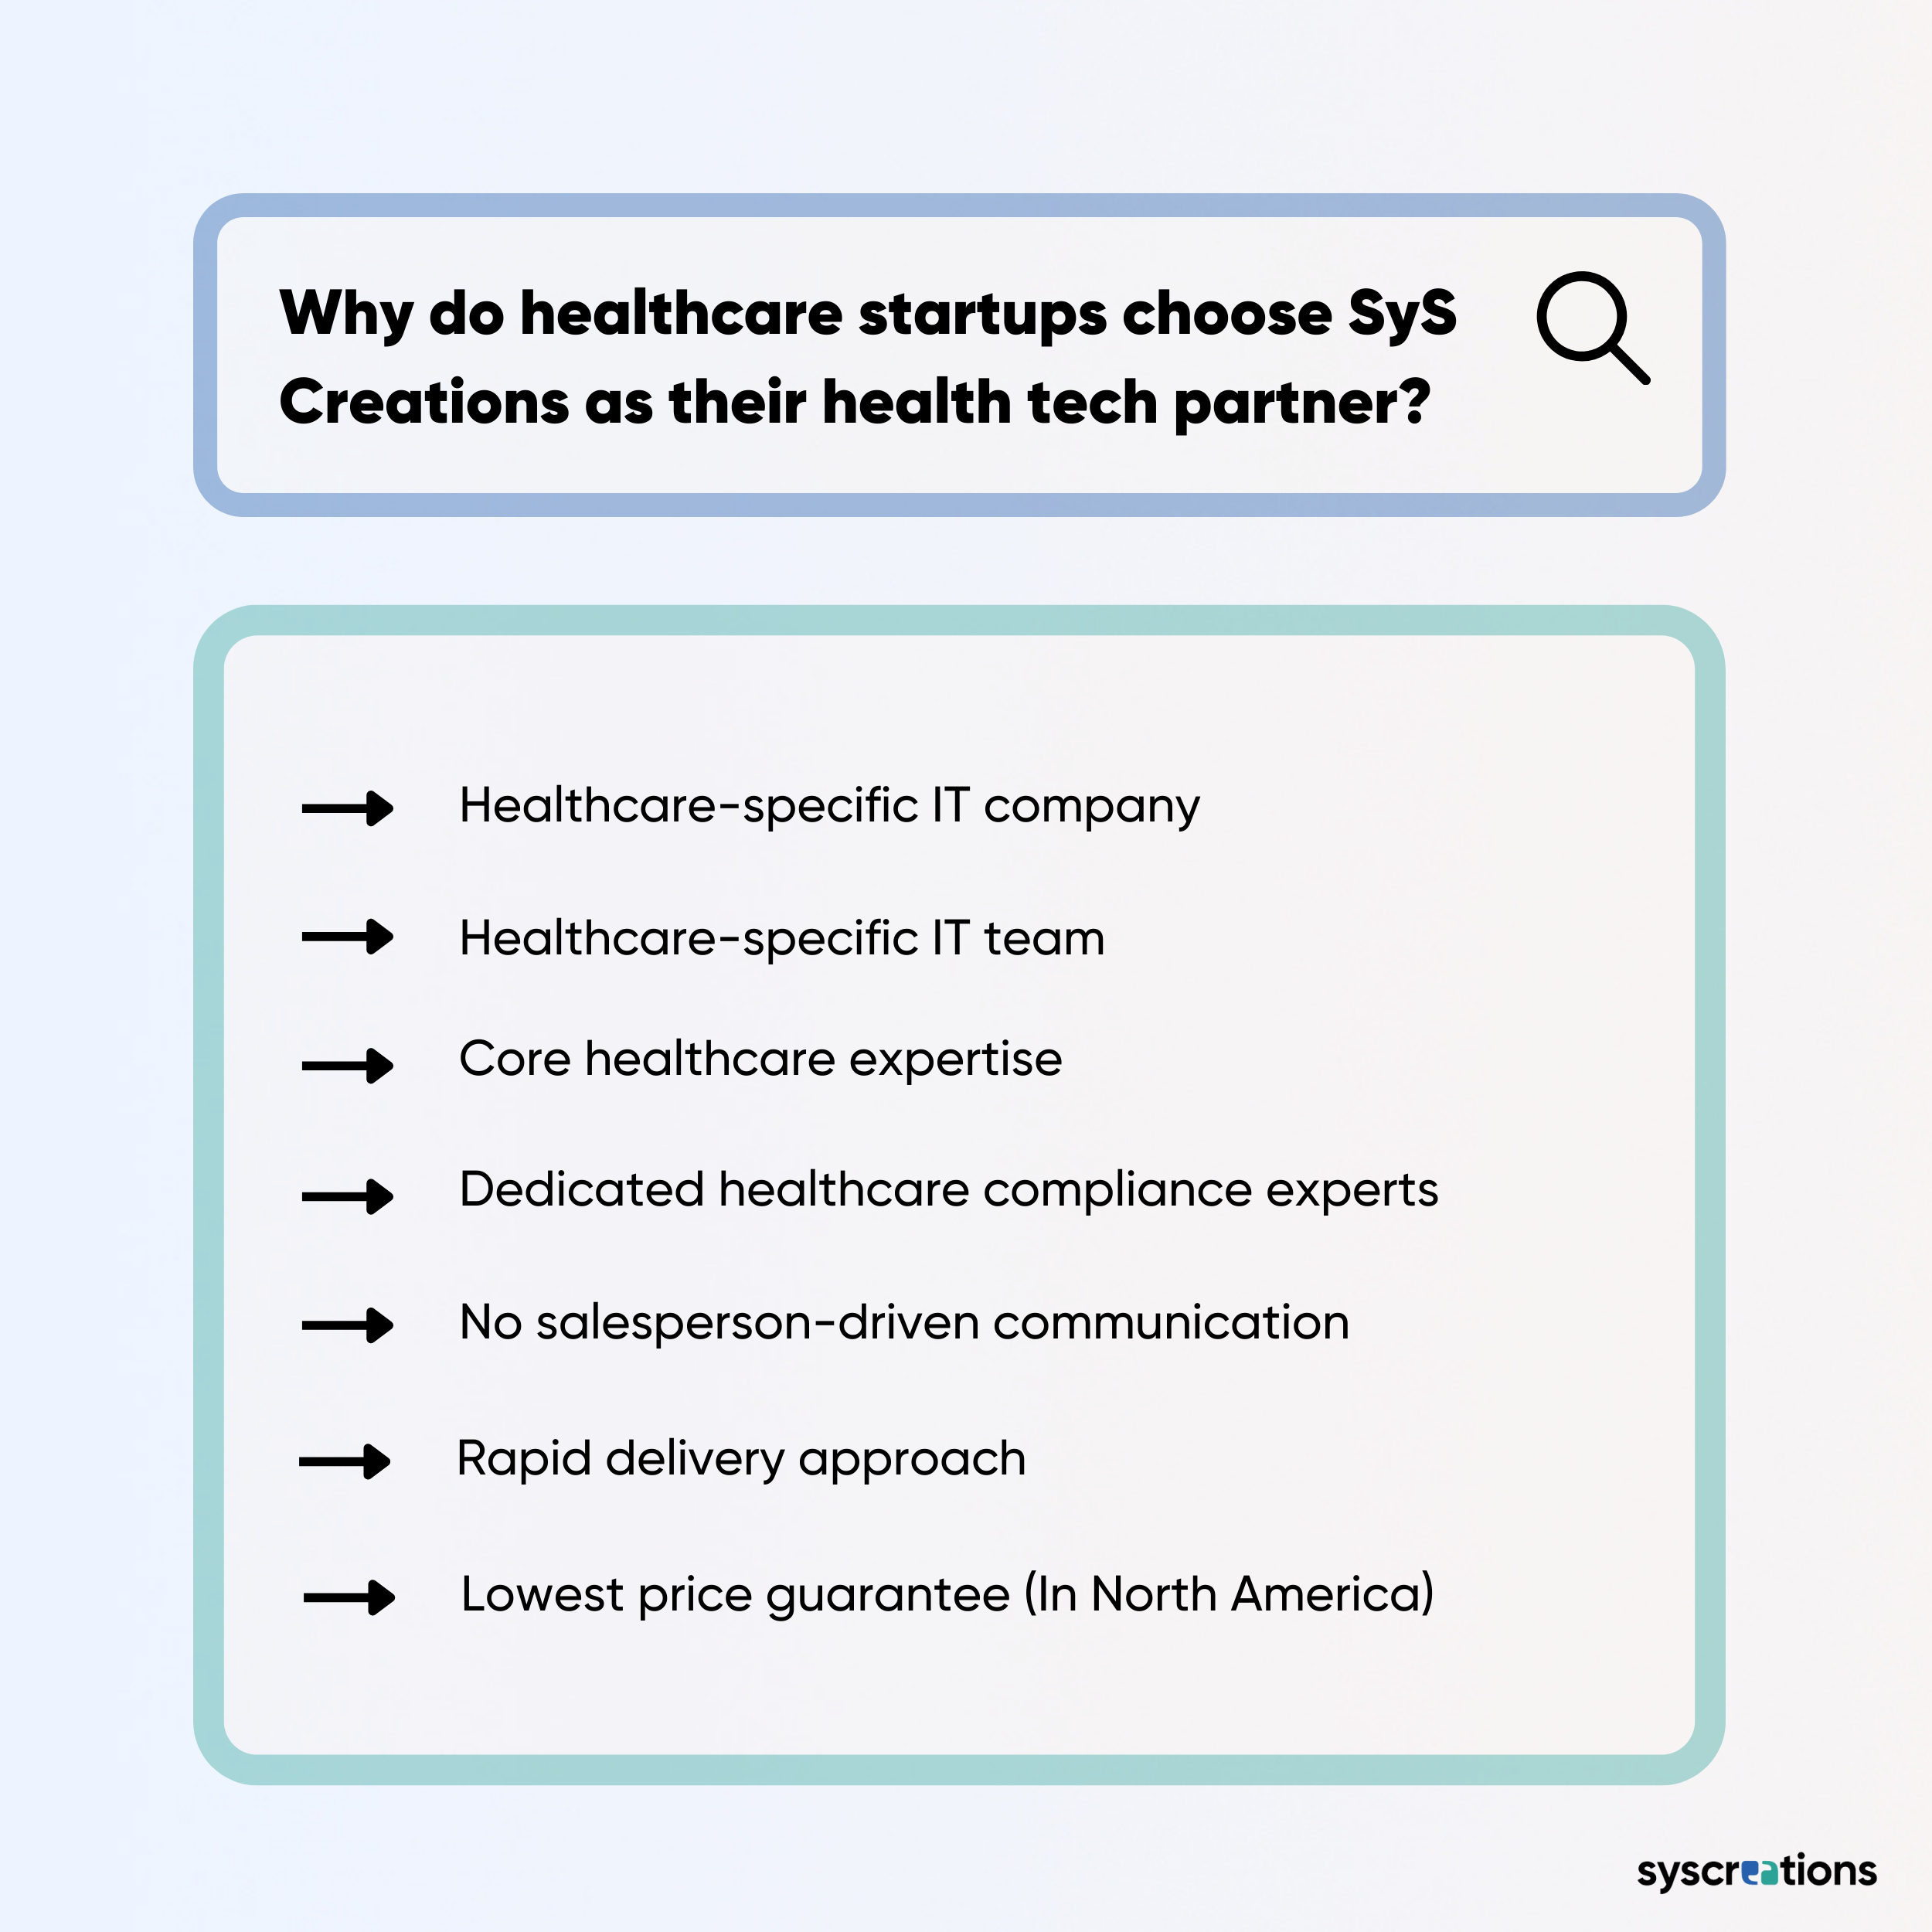 Why do healthcare startups choose SyS Creations as their health tech partner (1)